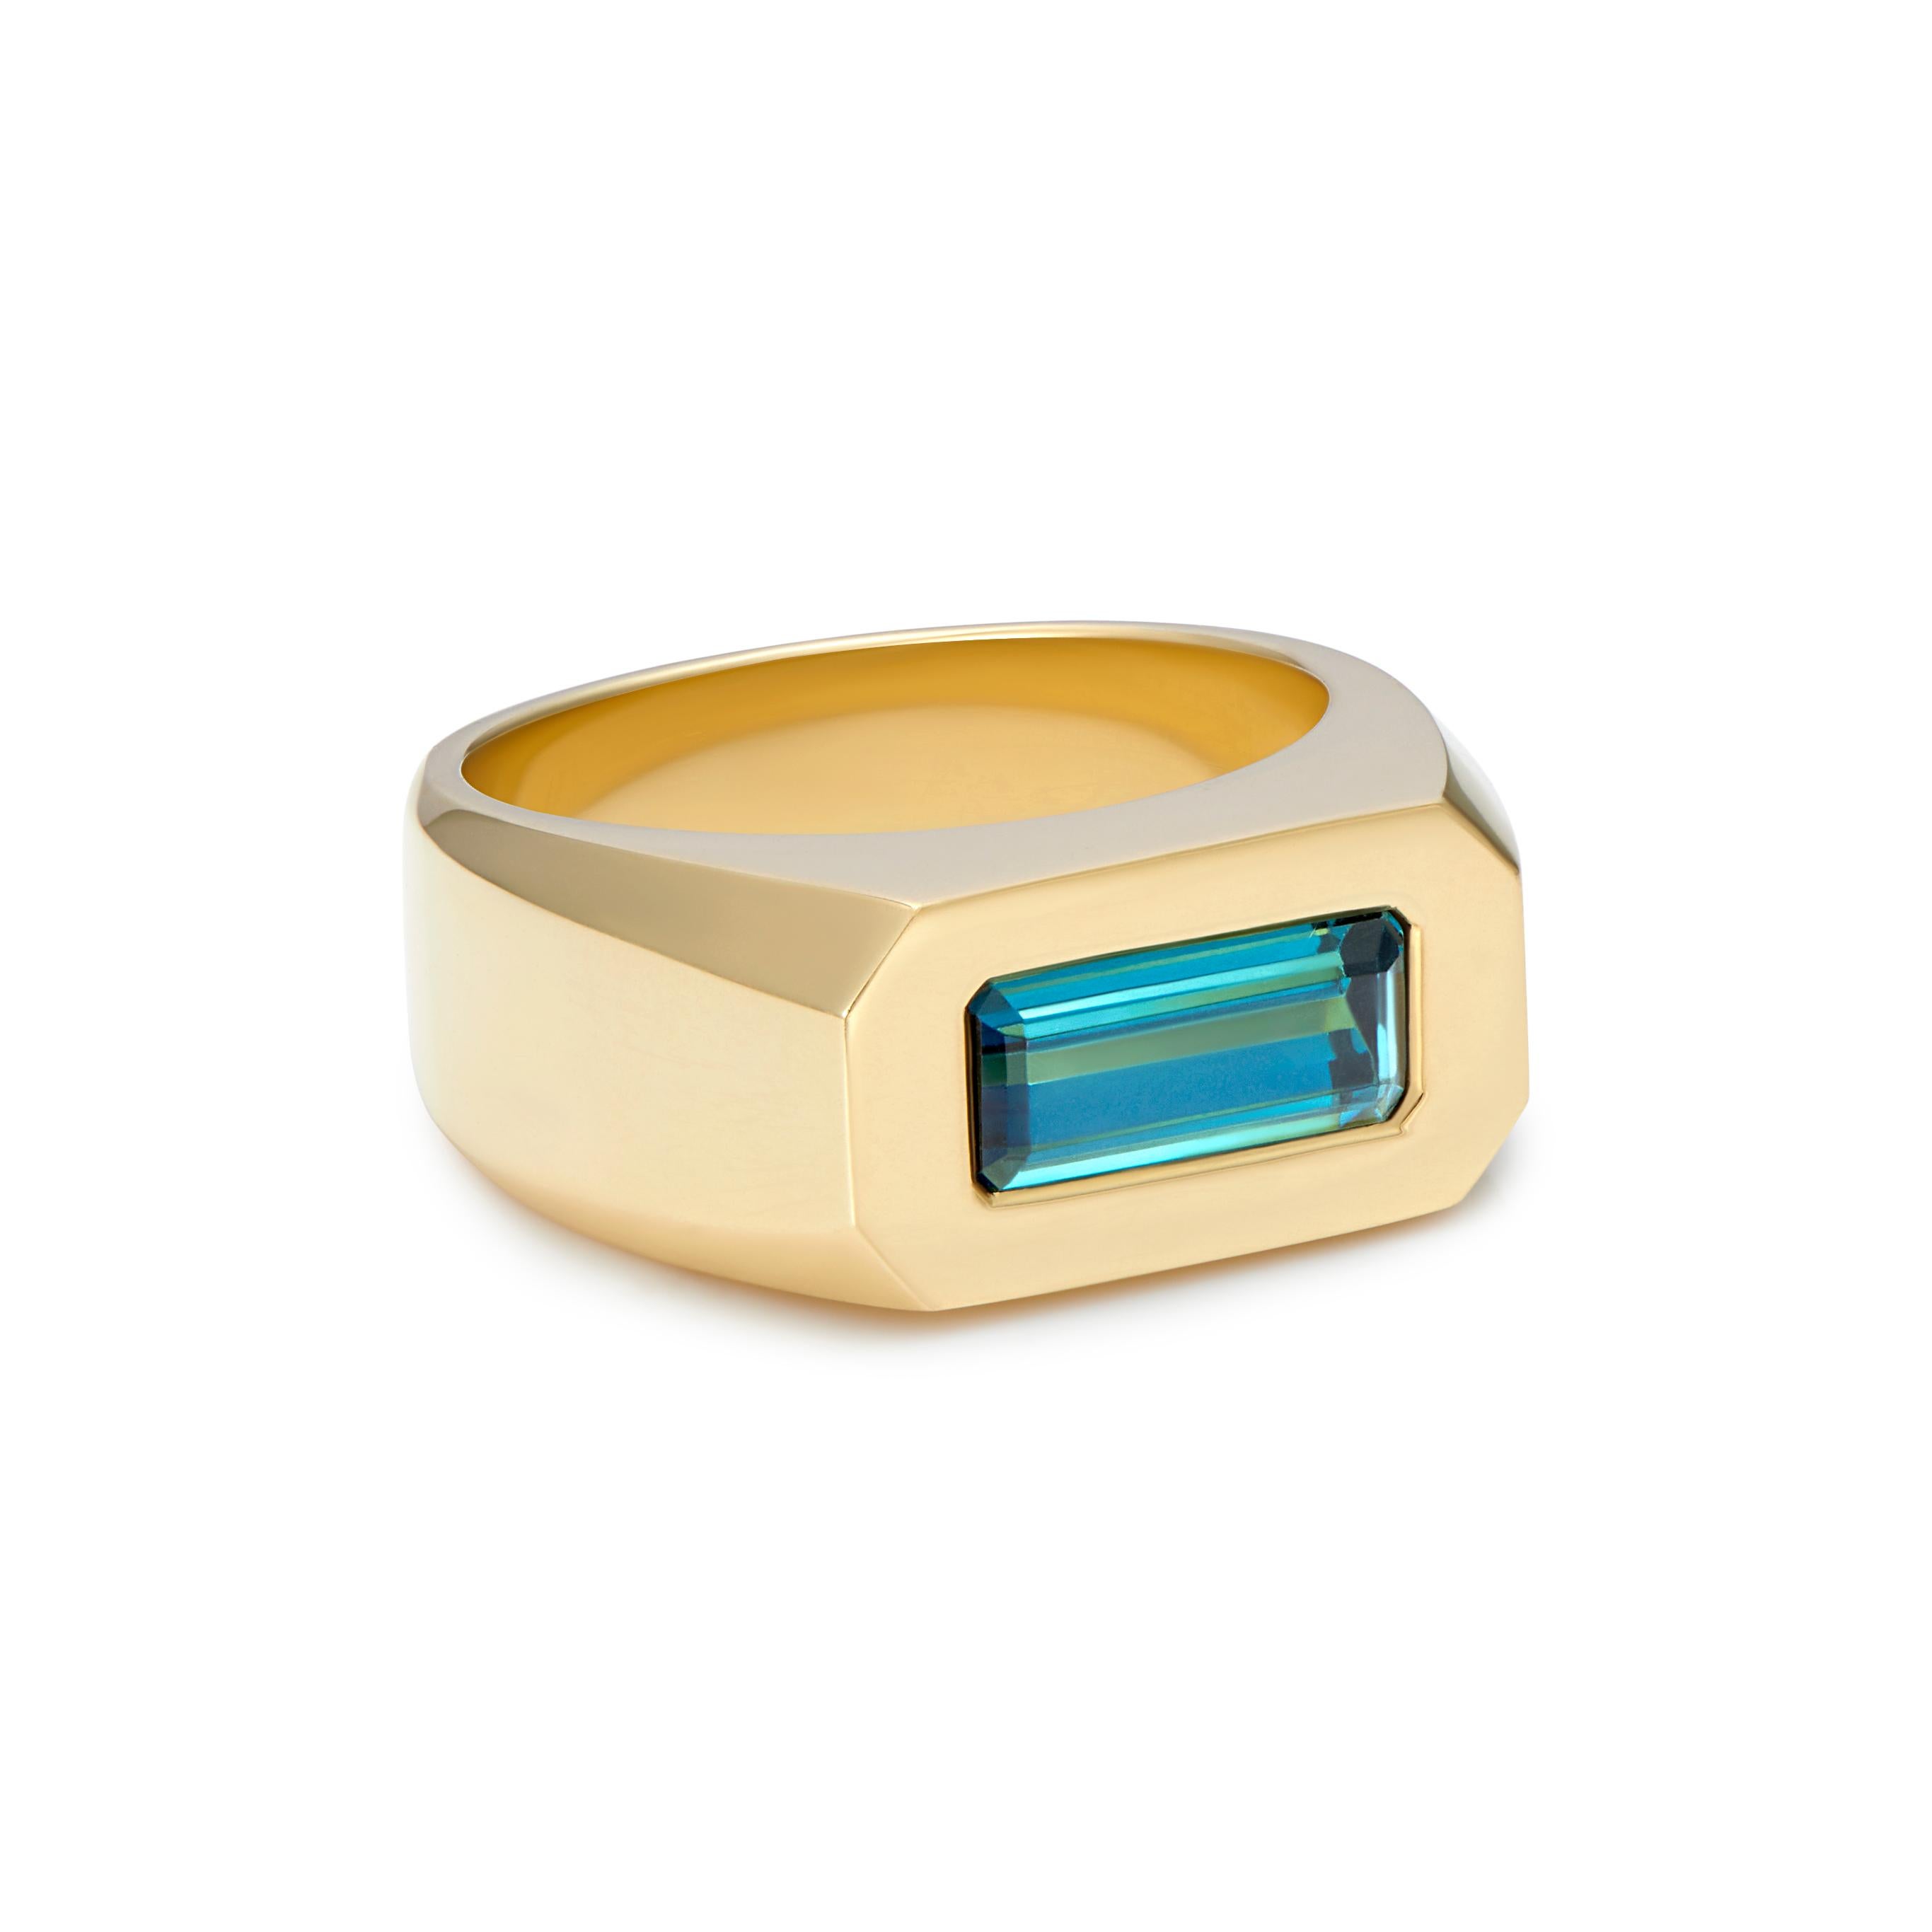 A beautiful 1.5ct teal Tourmaline ring set in 18kt yellow gold, hand made in England by exceptionally talented goldsmiths. This ring is set with a baguette-cut teal Tourmaline.

This collection distils the beauty and glamour of 1920s Berlin into a